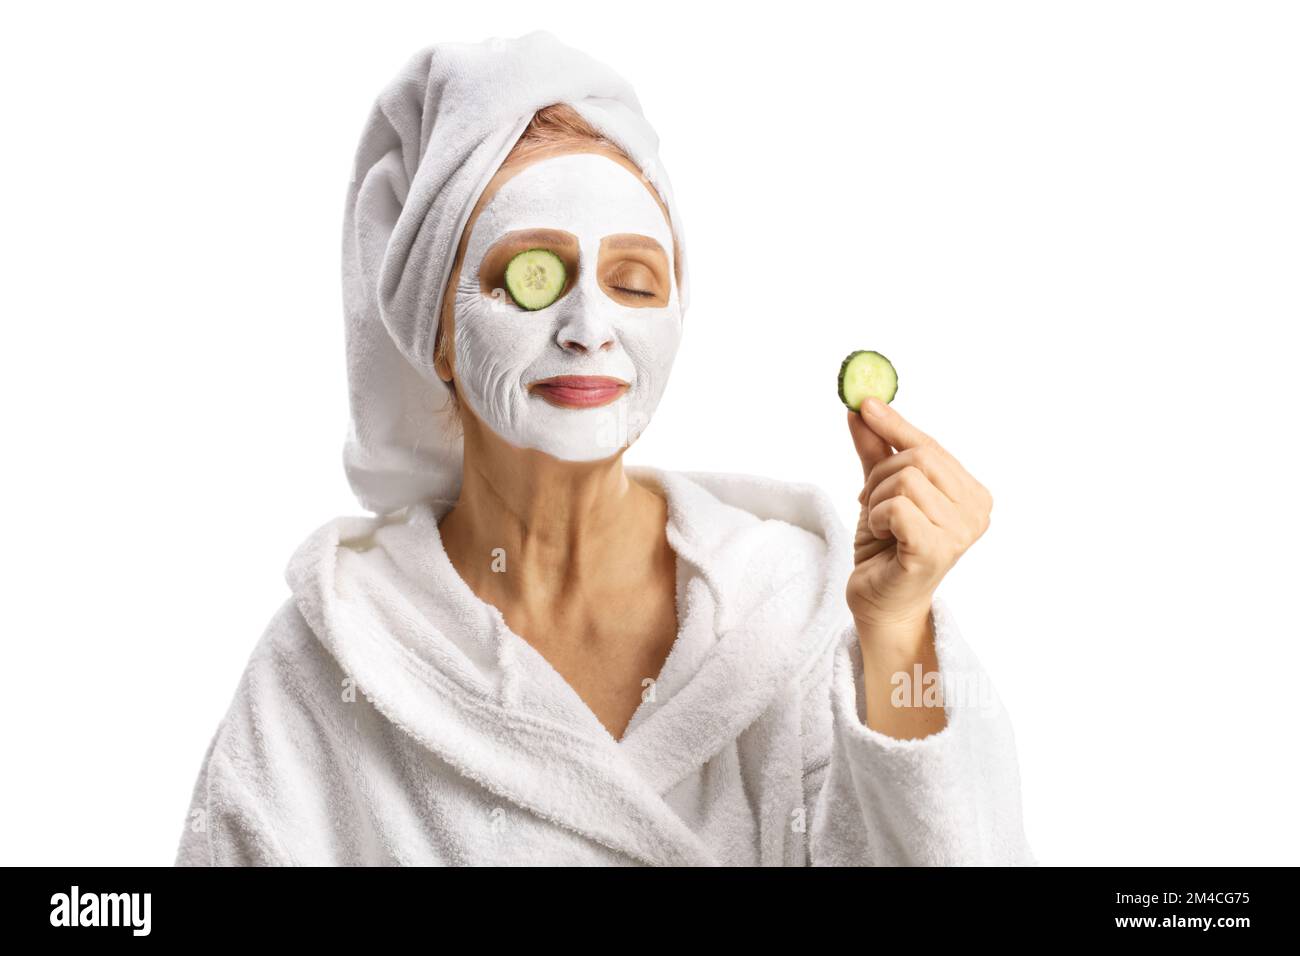 Woman with a towel on her head and a face mask holding a piece of cucumber isolated on white background Stock Photo